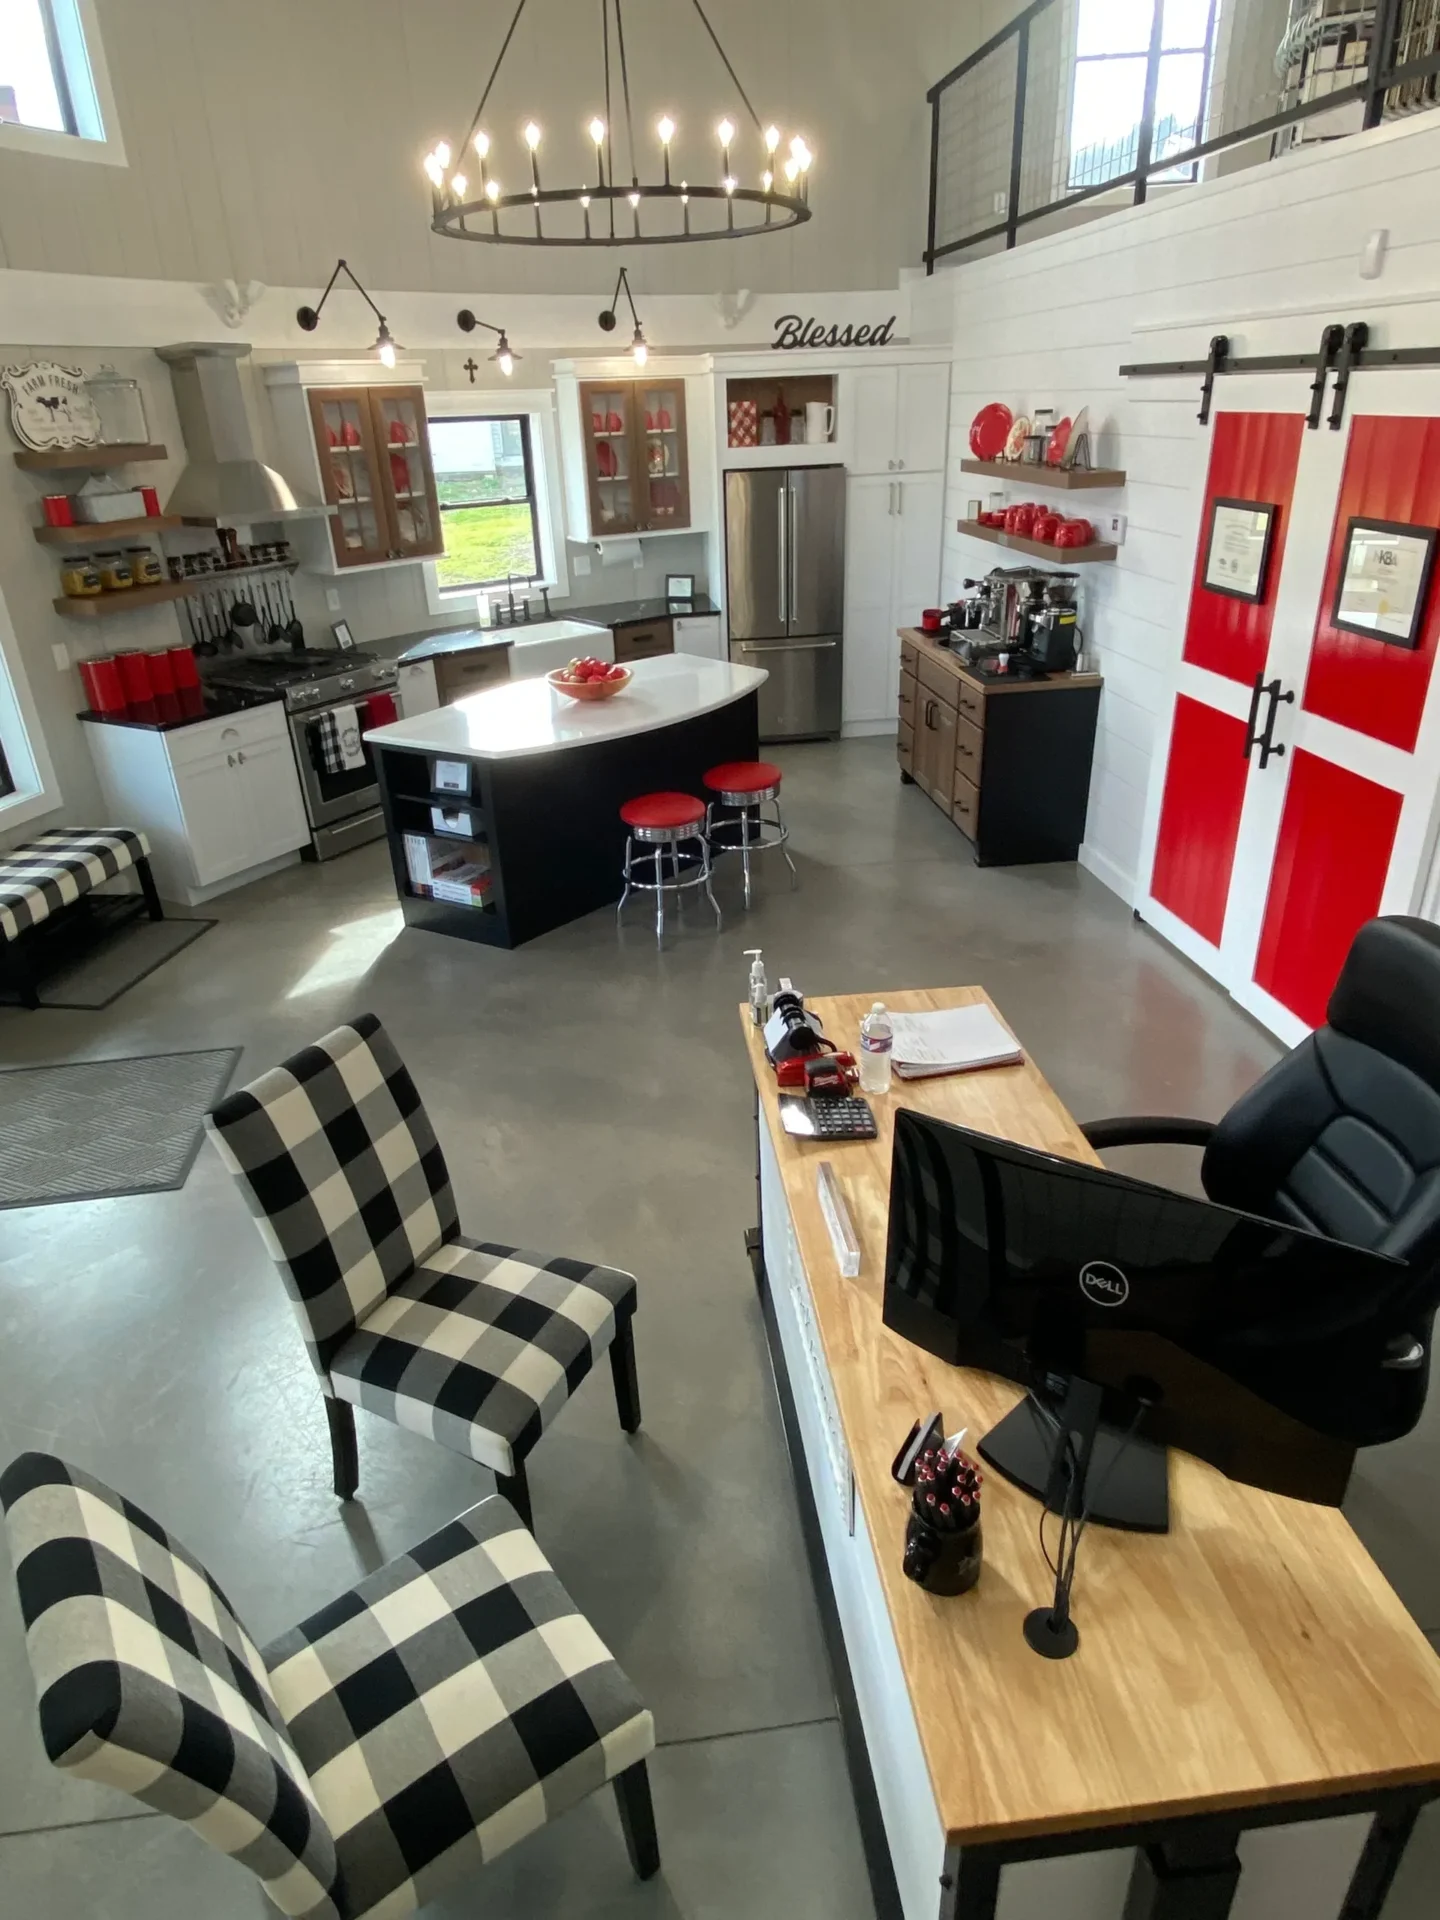 A kitchen with a red and black checkered table and chairs.